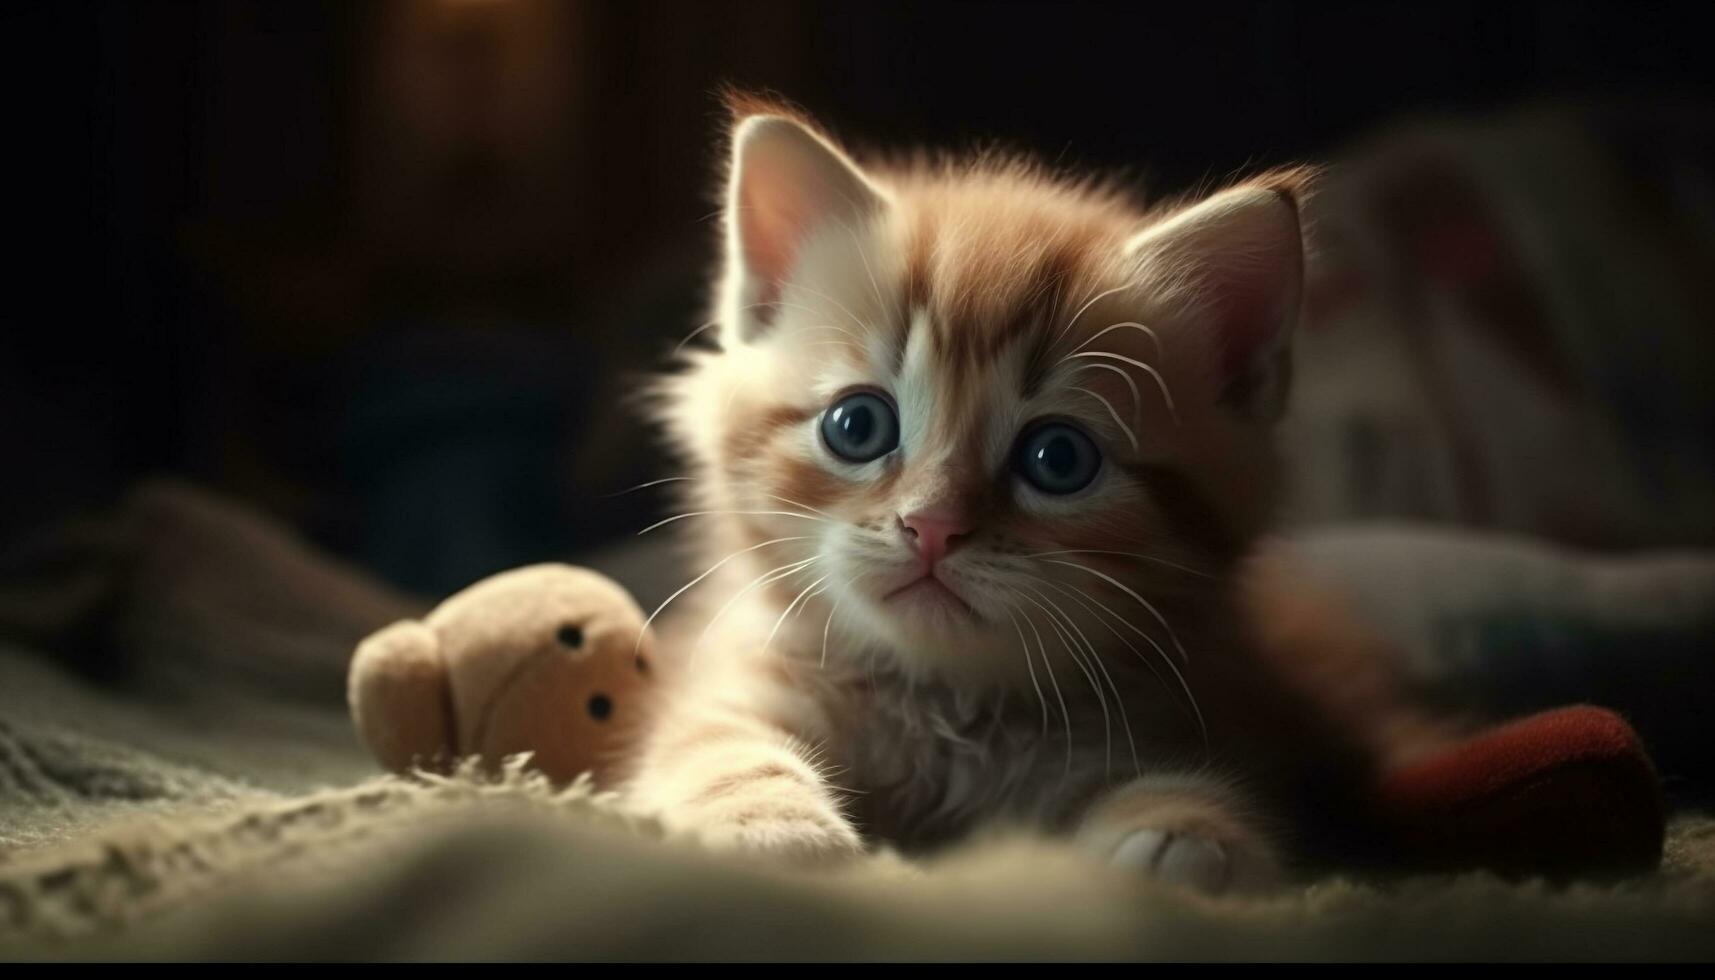 Cute kitten playing with toy, staring with blue eyes generated by AI photo